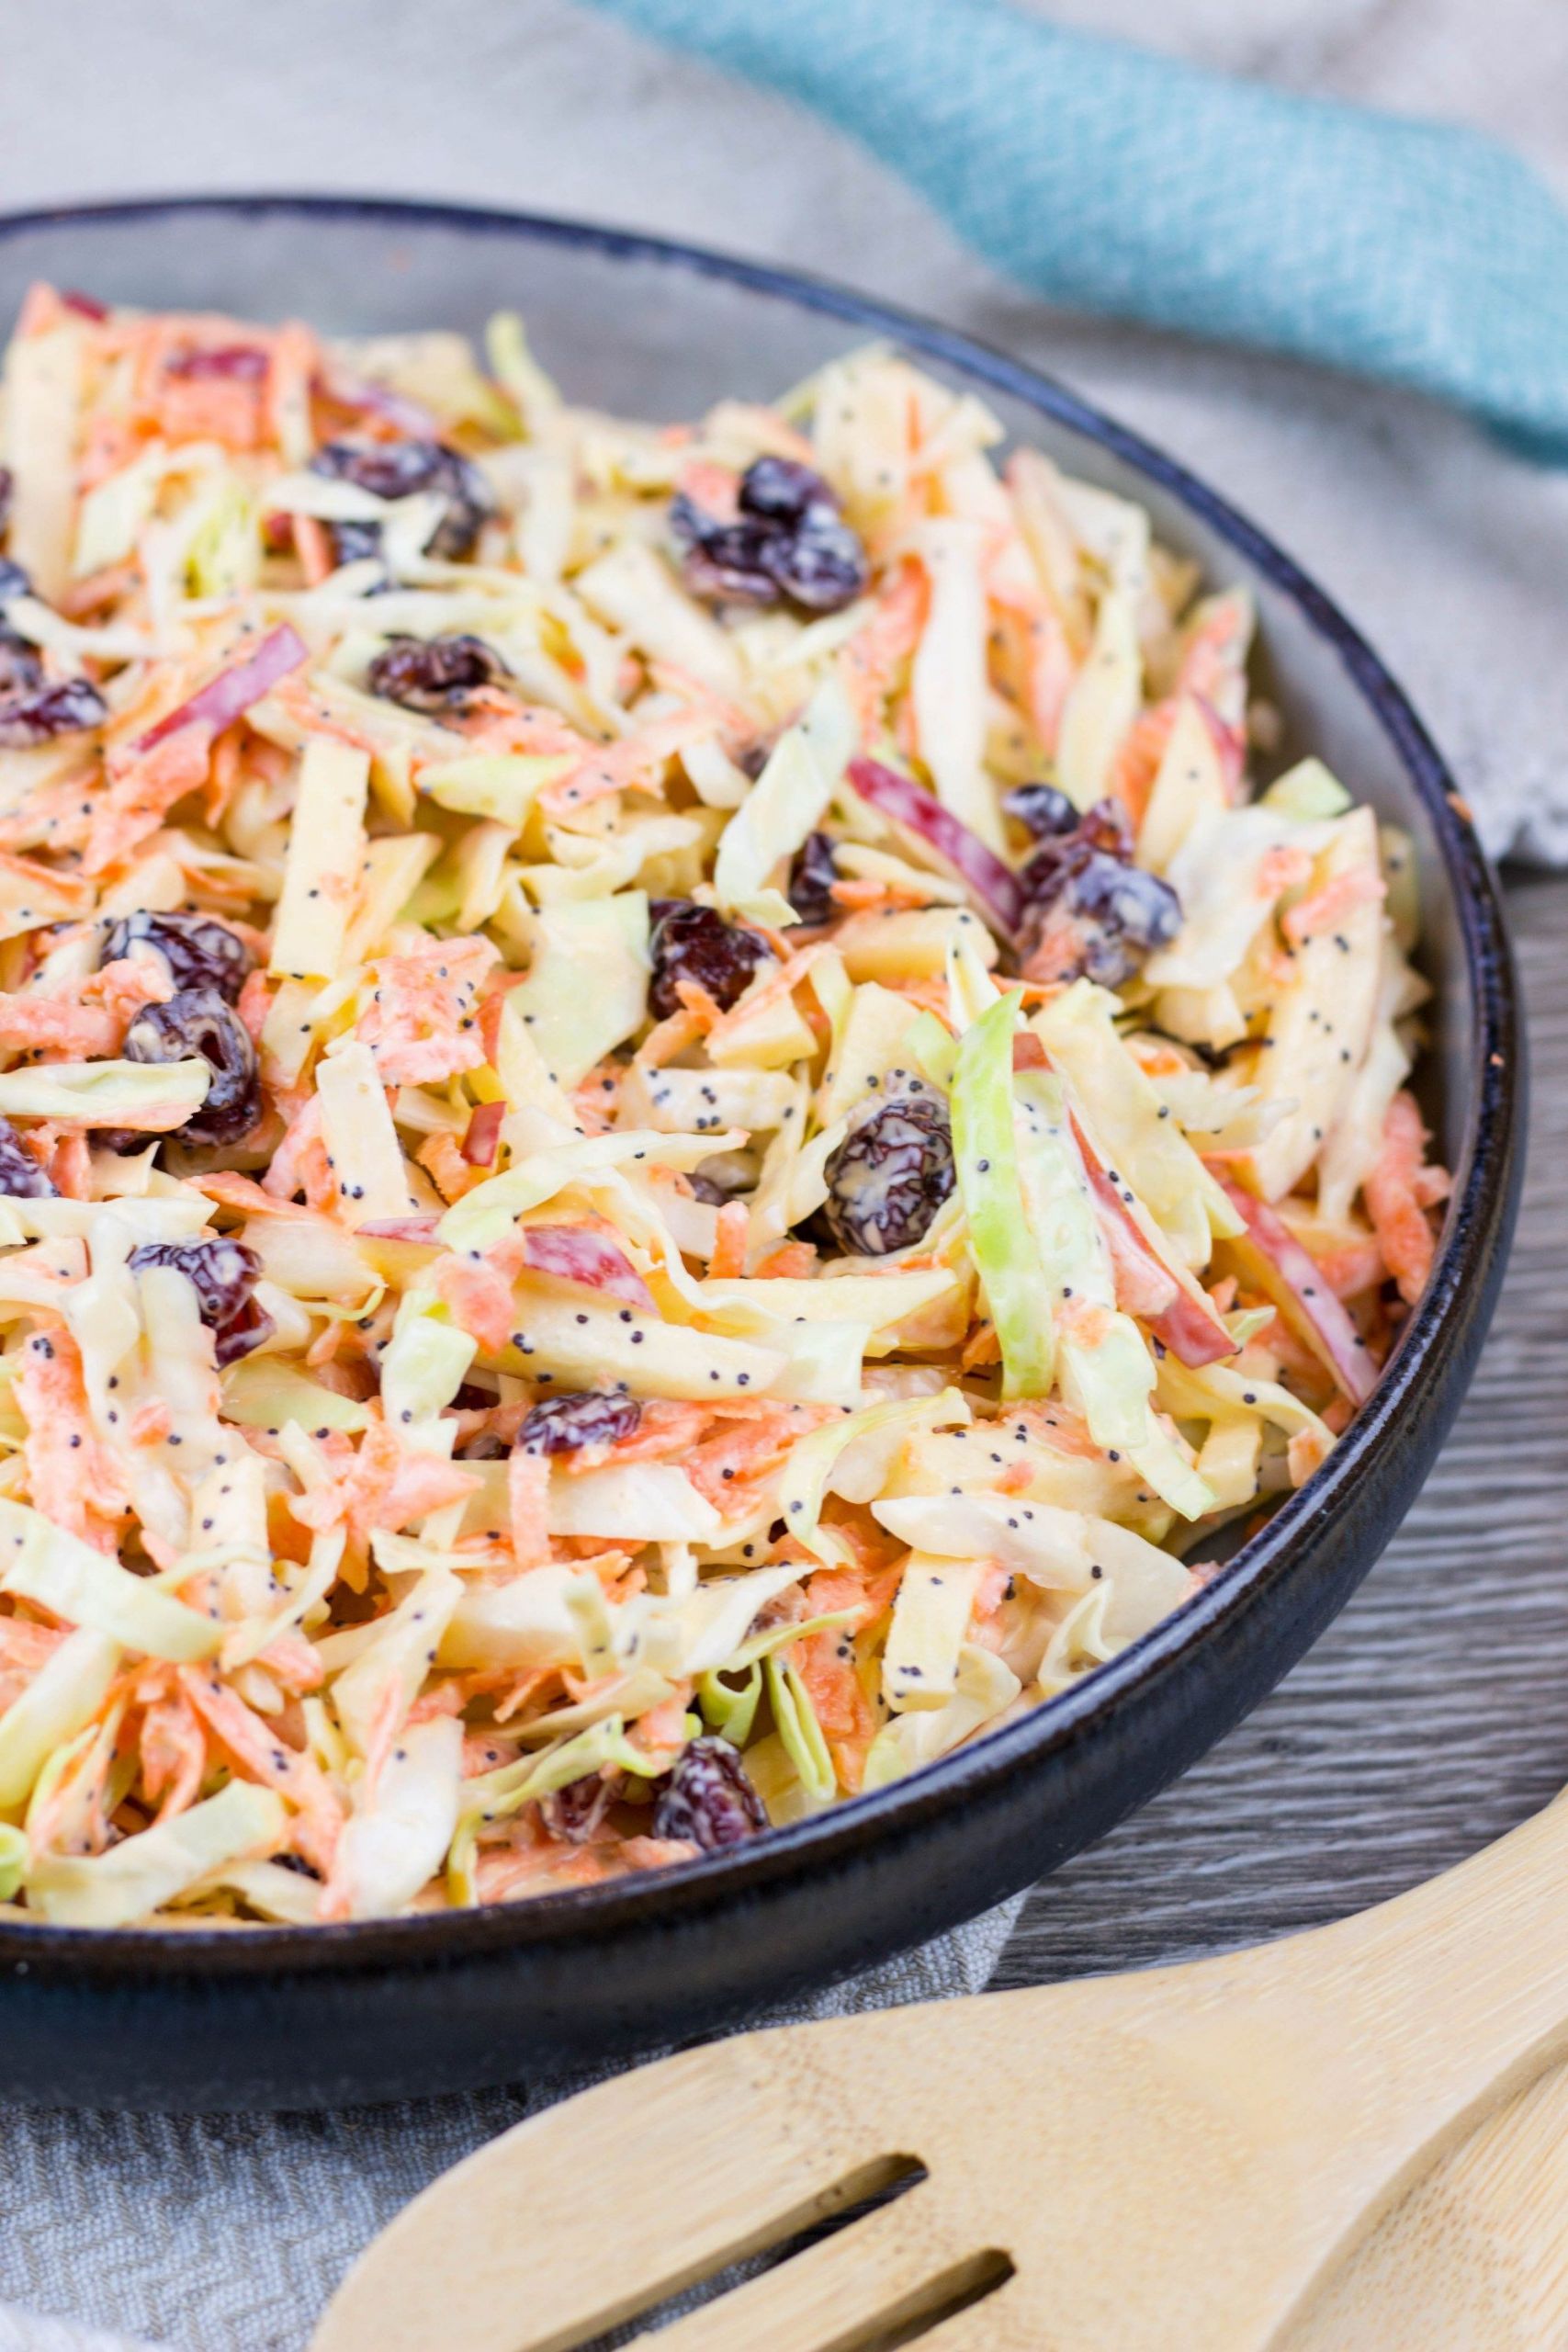 Healthy Side Dishes For Sandwiches
 Apple Cranberry Coleslaw Recipe